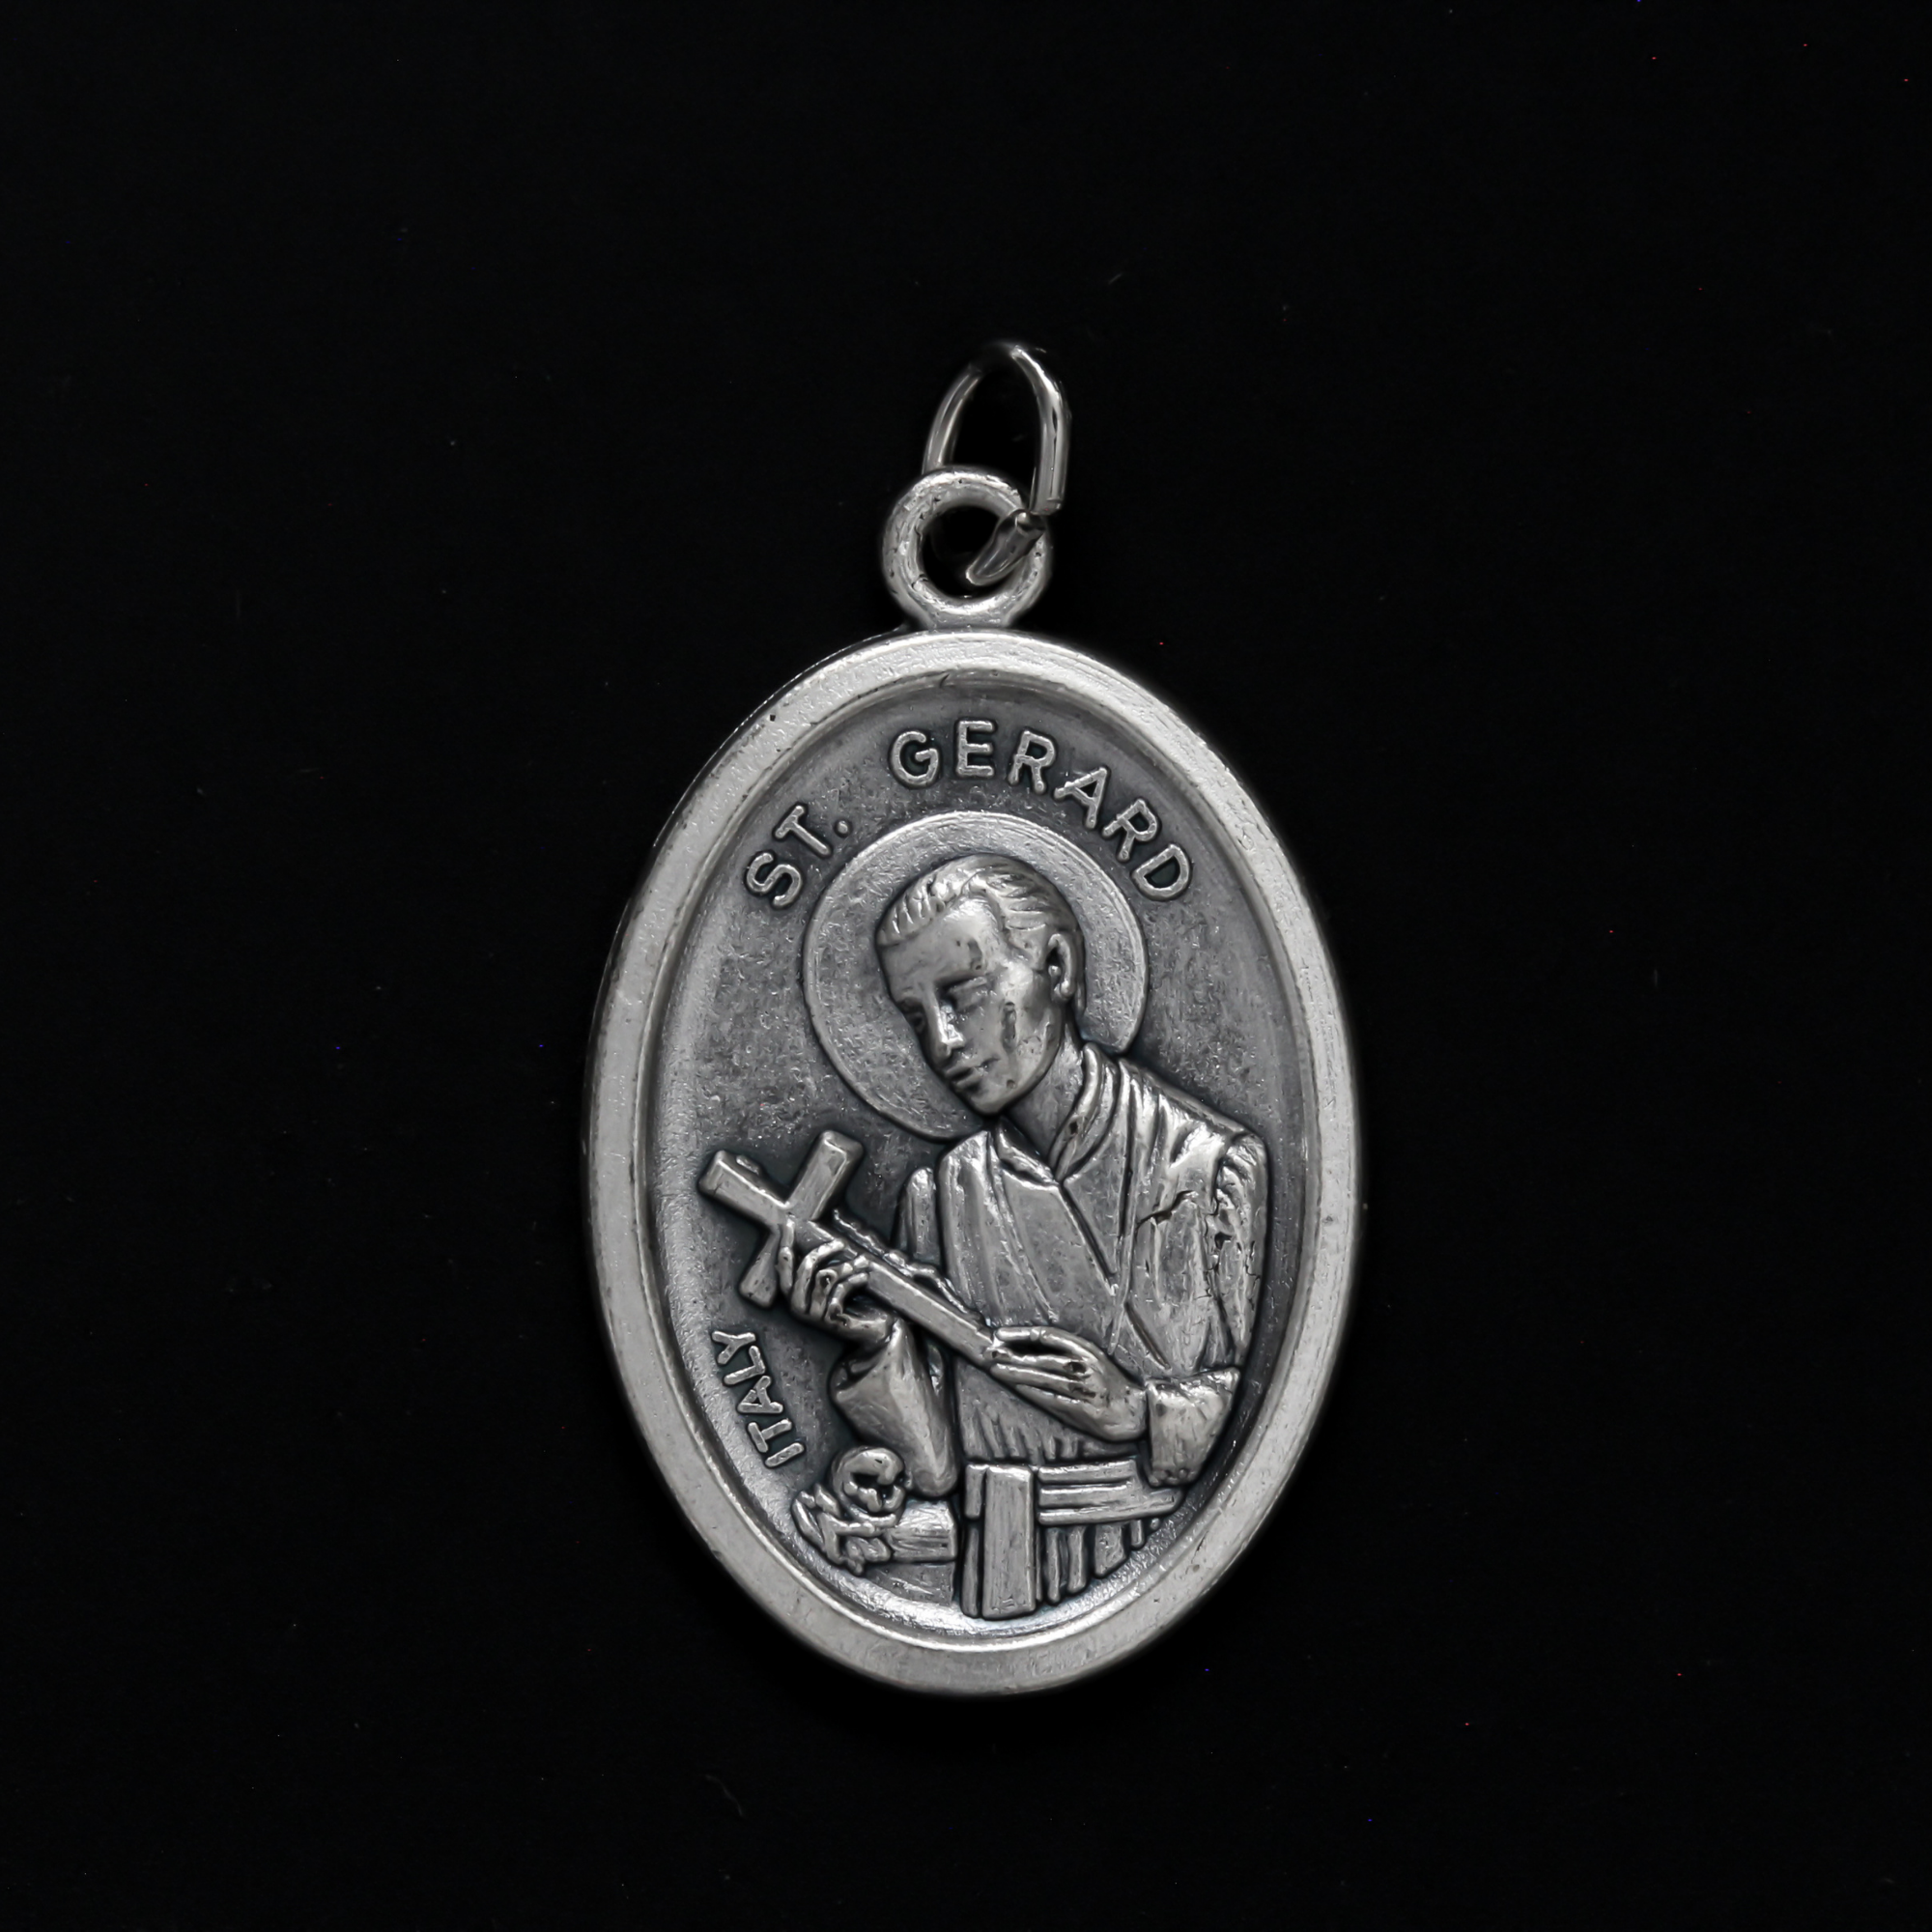 Saint Gerard Majella medal that depicts the saint holding a cross on the front and "Pray For Us" on the back